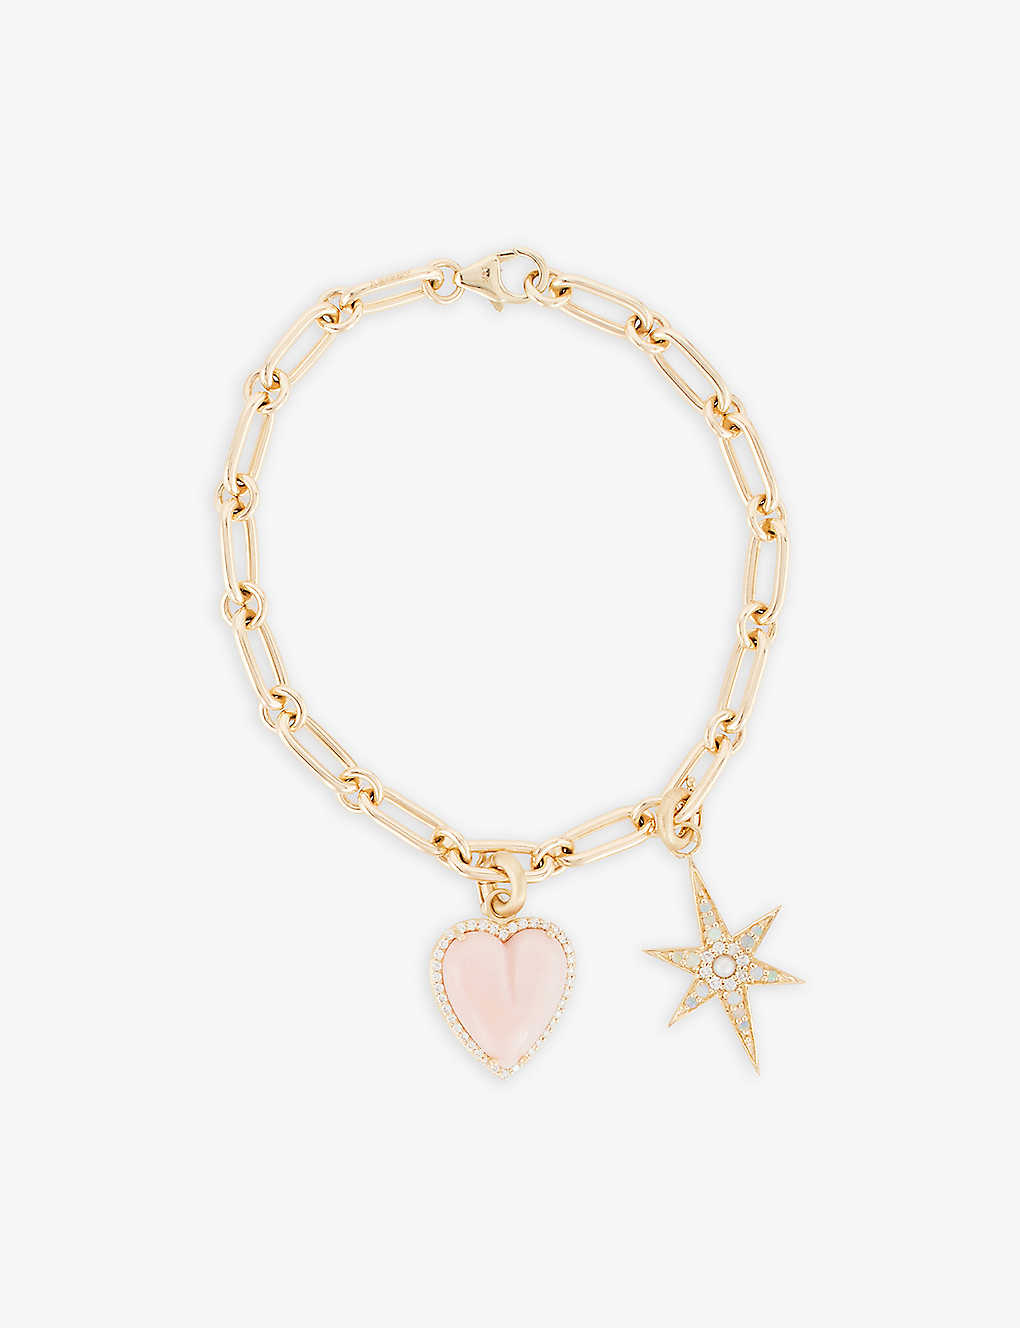 STORROW - Heart Star 14ct yellow-gold, diamond, opal, pink opal and pearl  charm bracelet